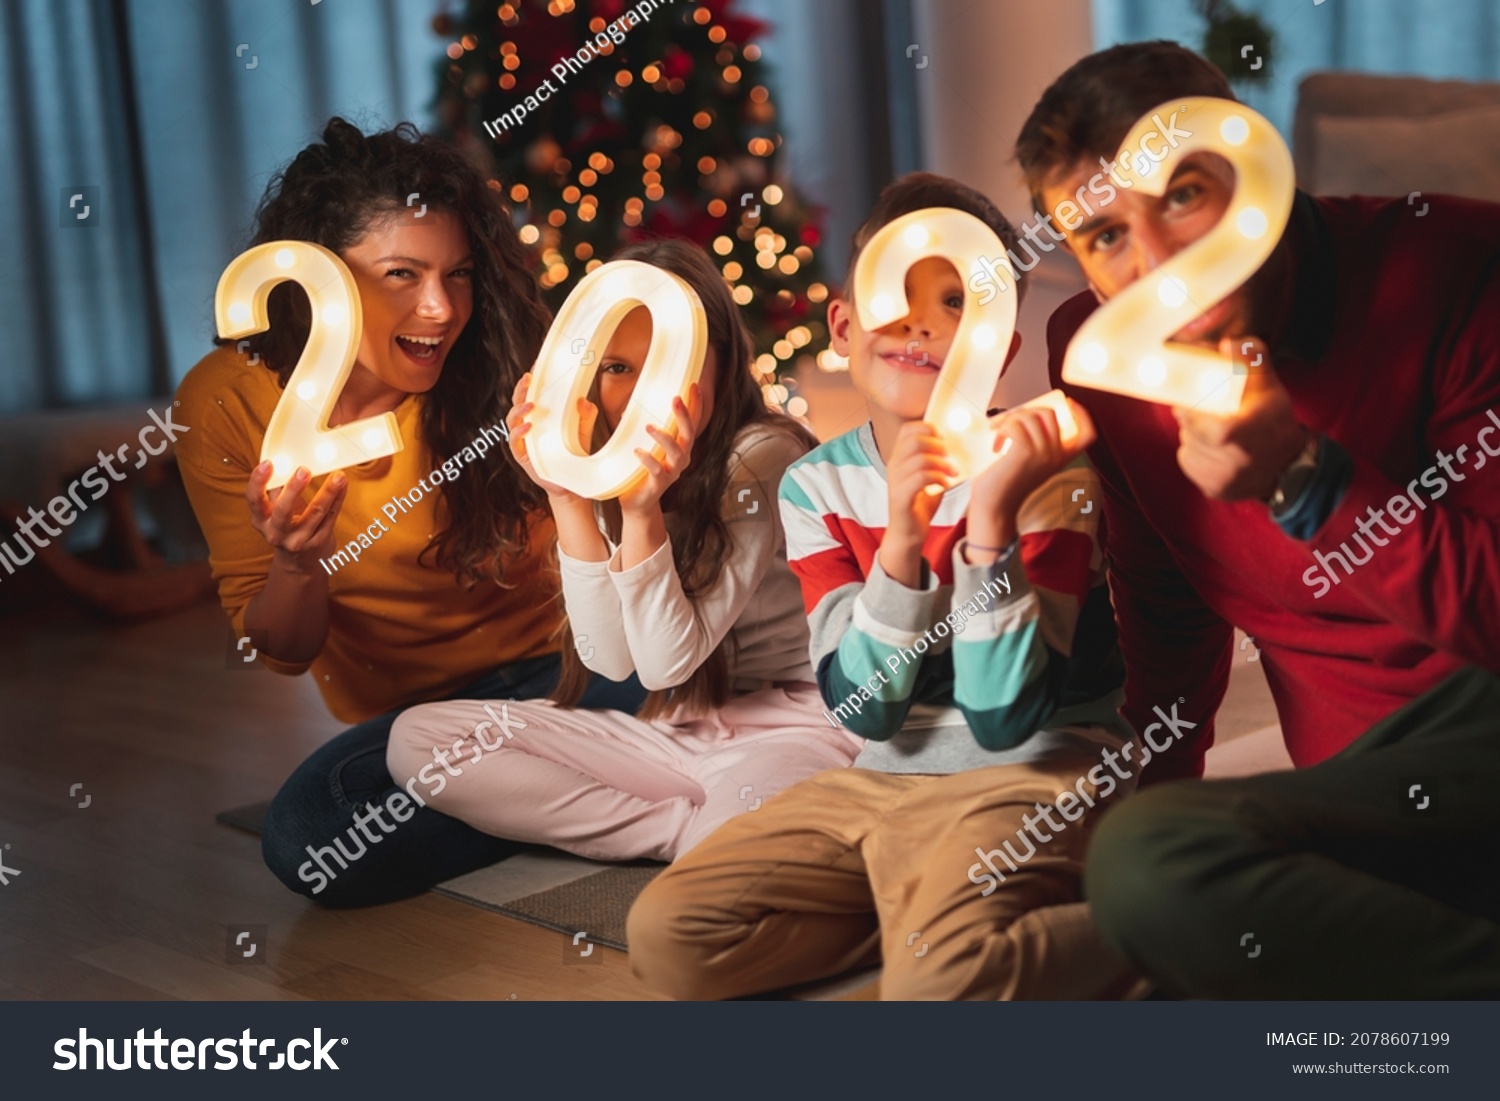 Happy family celebrating New Years Eve at home with kids, sitting by the Christmas tree, holding  illuminative numbers 2022 representing the upcoming New Year #2078607199